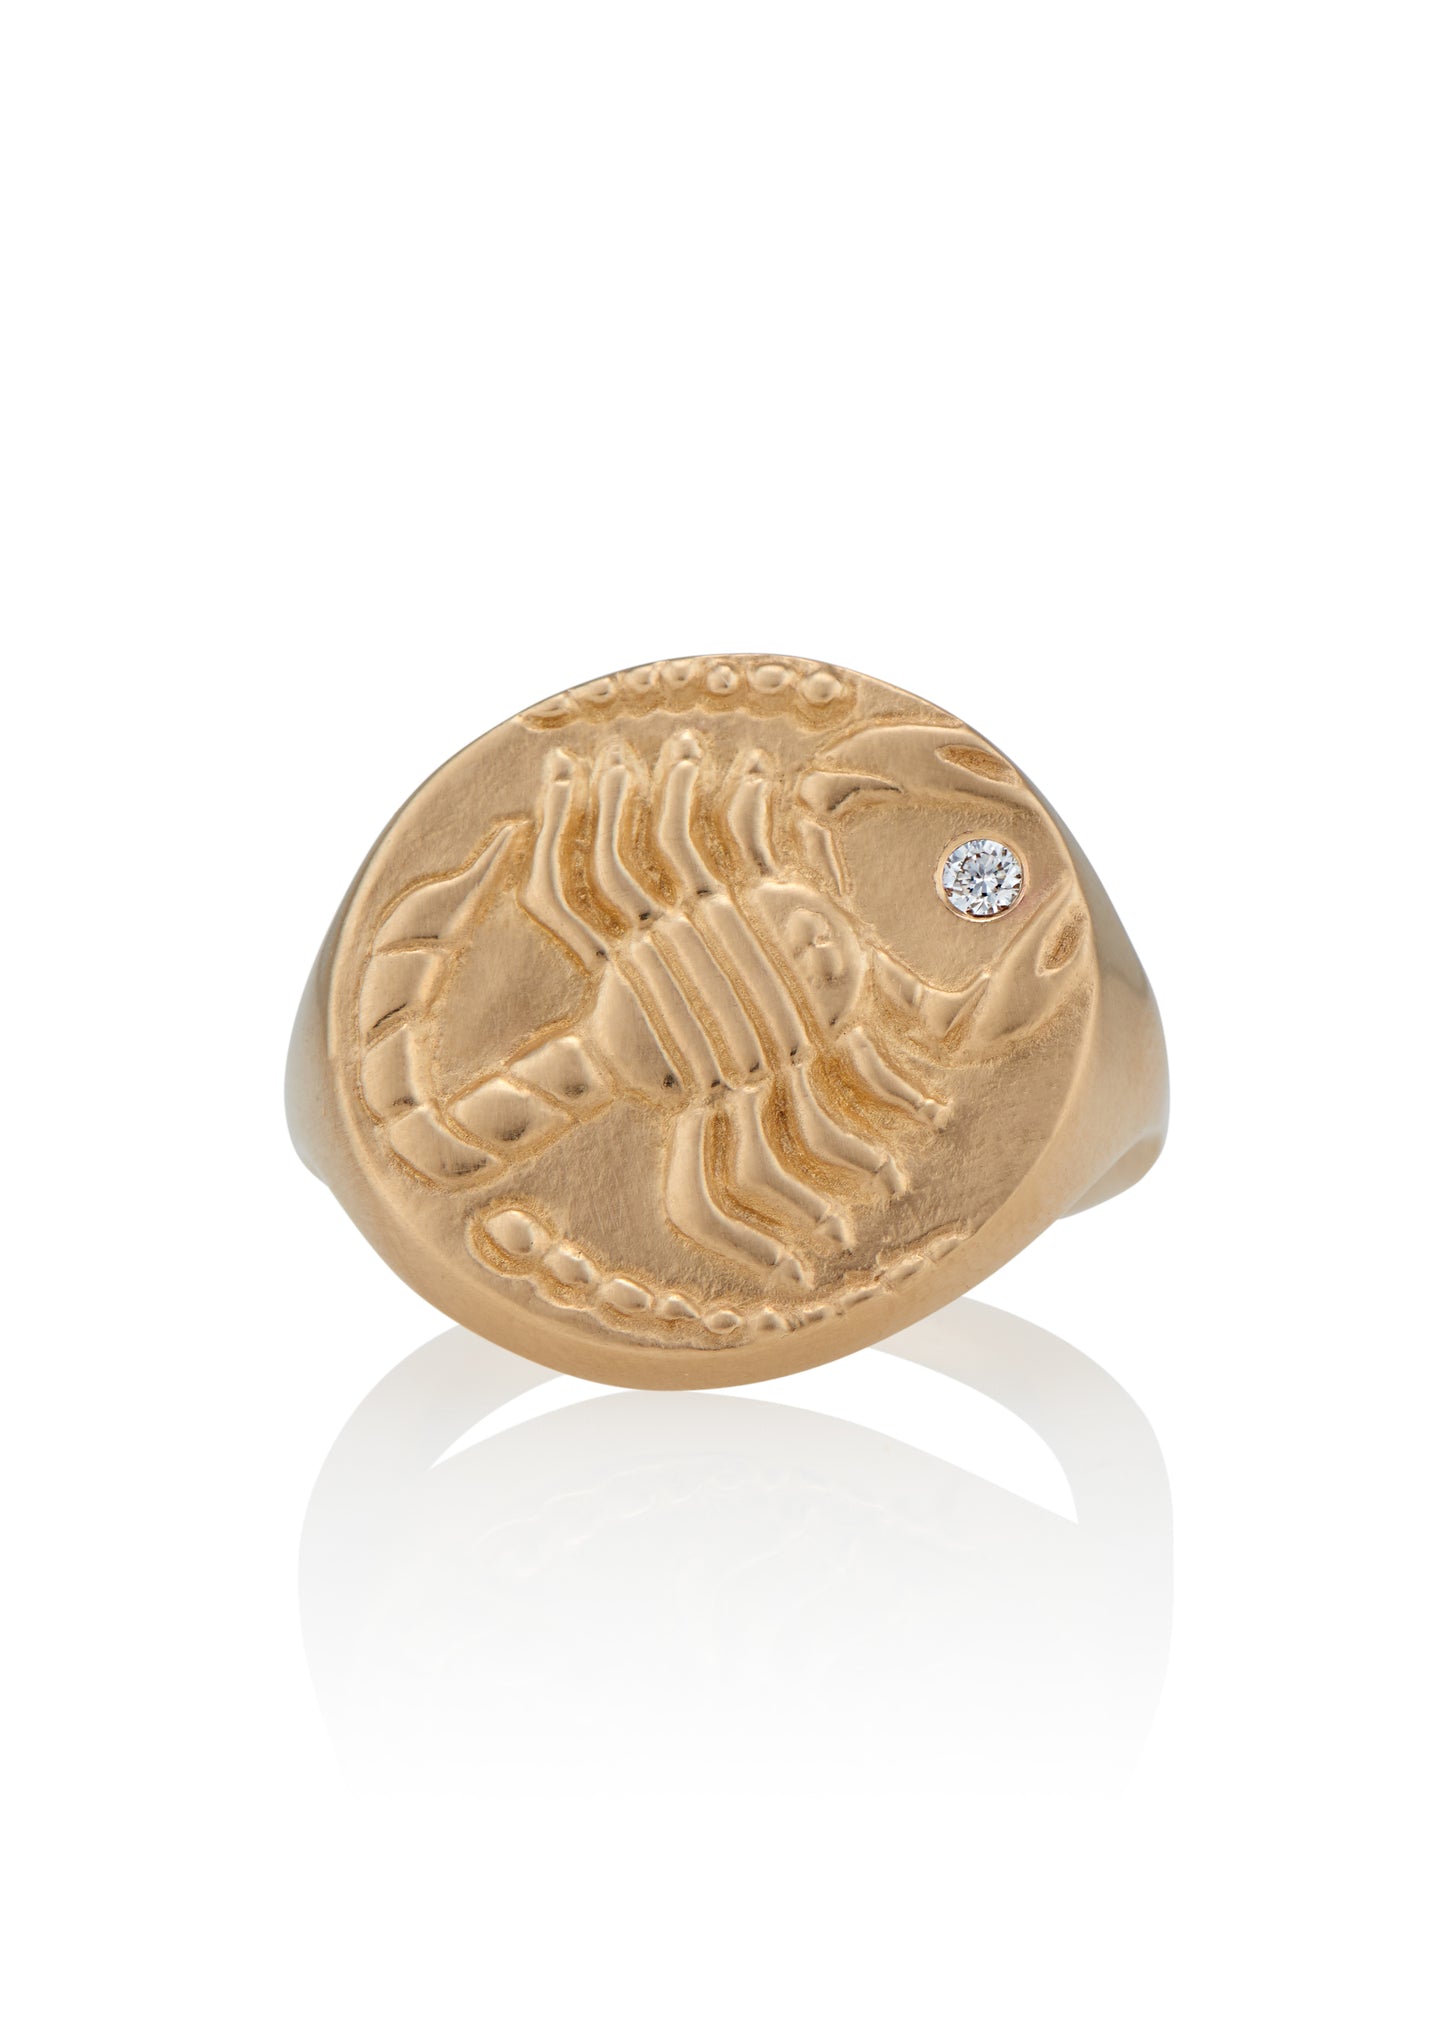 The eighth sign of the Zodiac, water sign Scorpio is a passionate truth-seeker who leads with decisiveness. A hand-detailed, fierce yet whimsical scorpion is accented with a precious diamond for a ring that captures the power of the celestial sky.